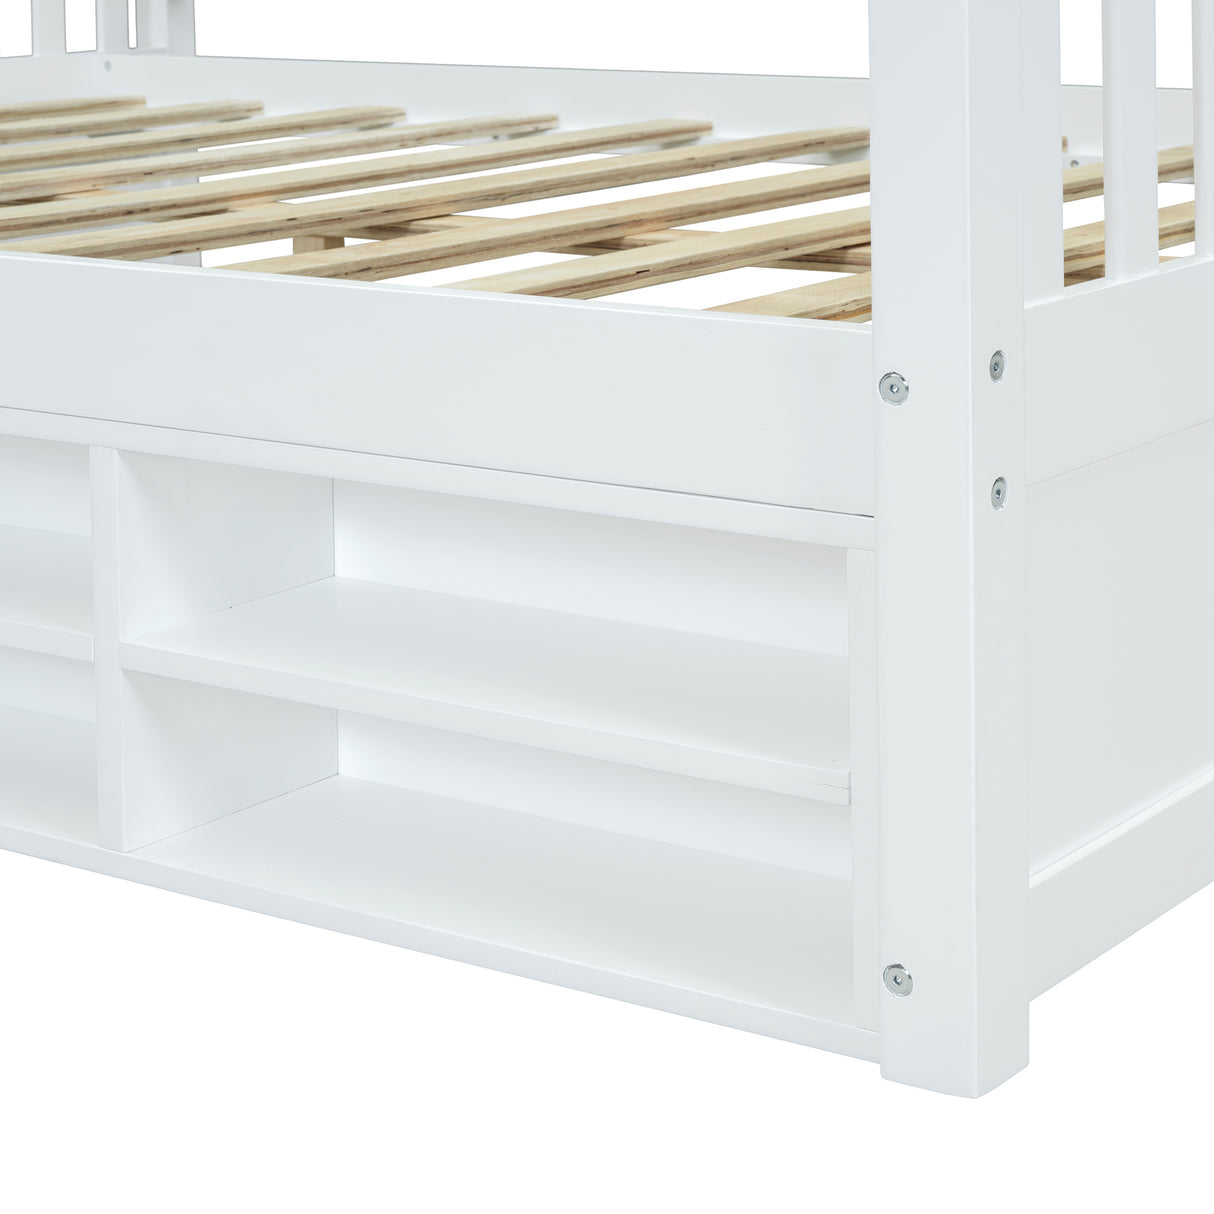 Full Size Wooden House Bed with Shelves and a Mini-cabinet, White - Home Elegance USA